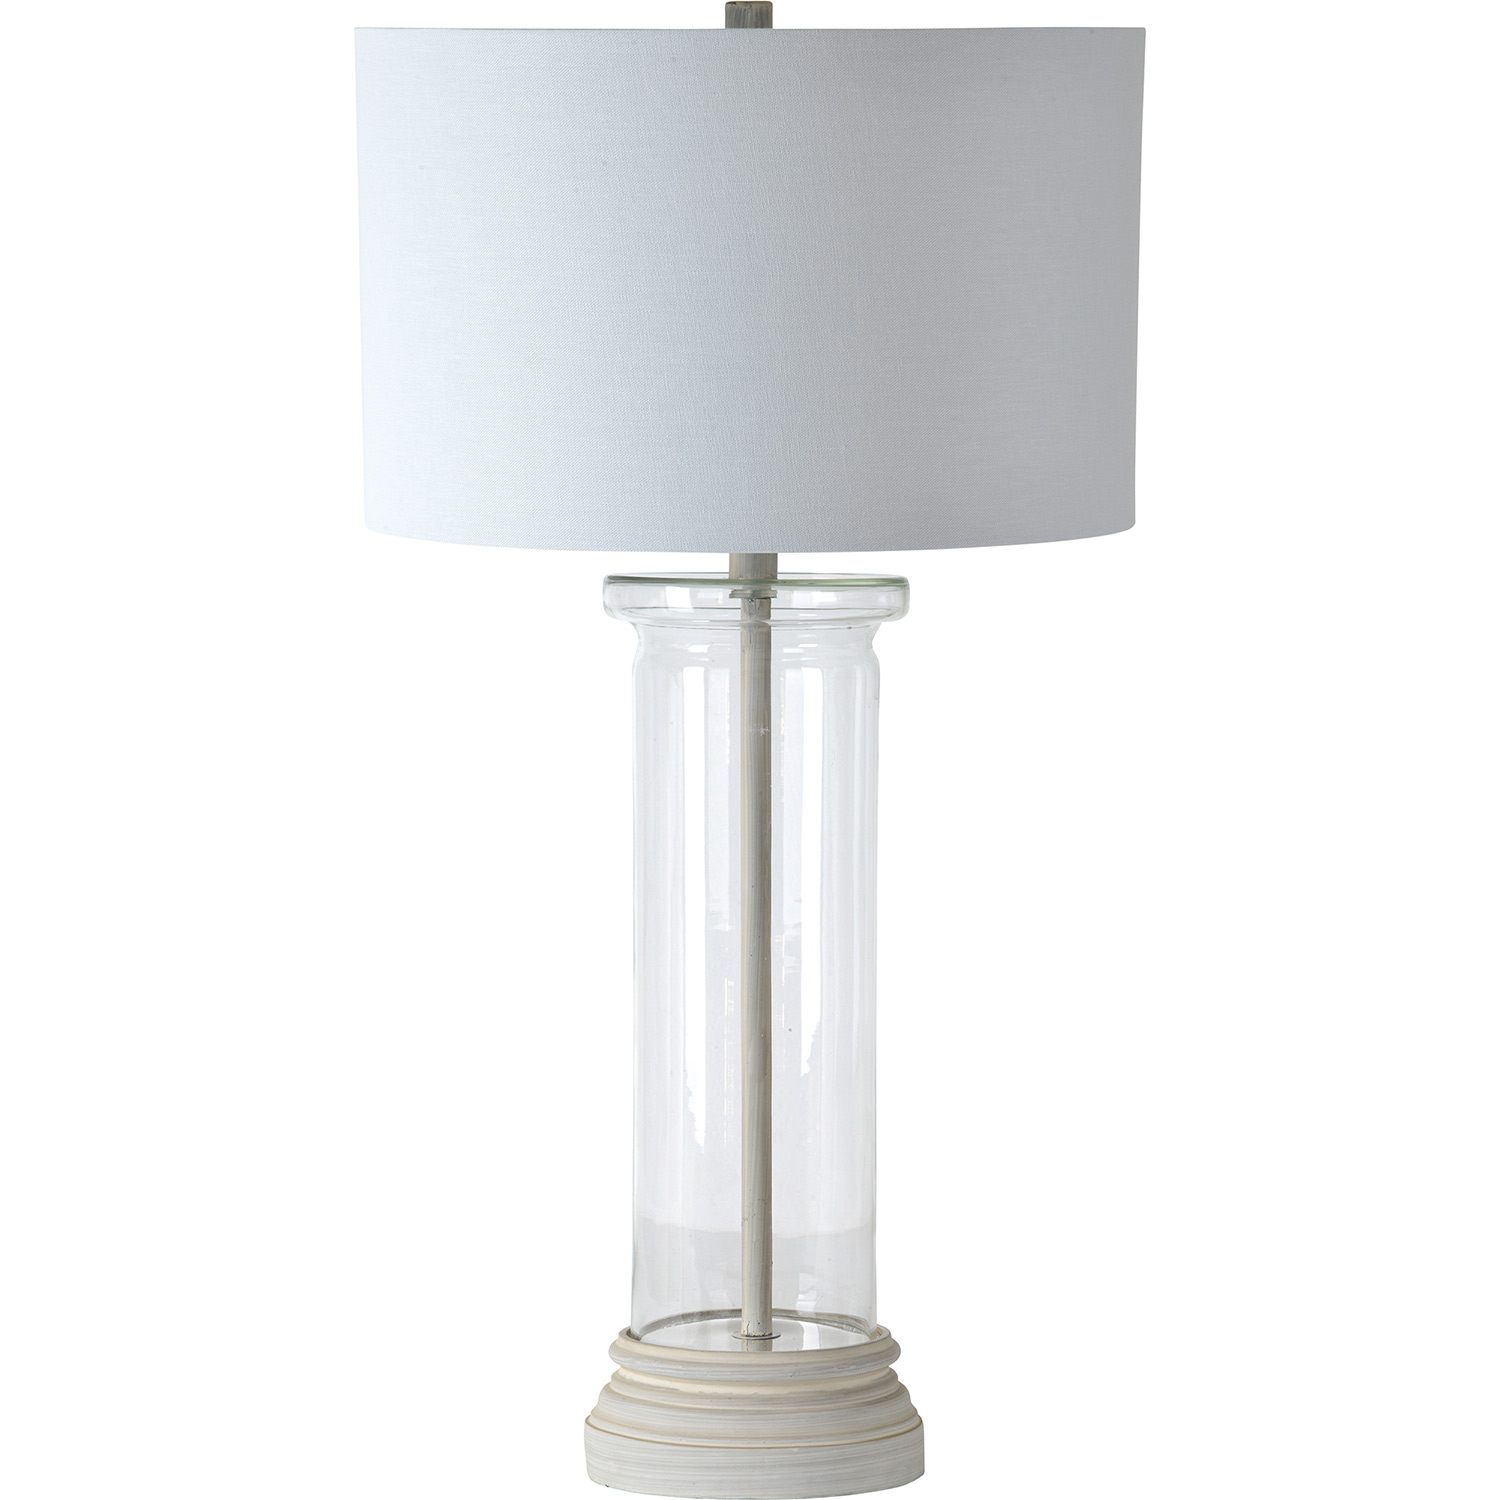 Ren-Wil West Table Lamp - White Wash